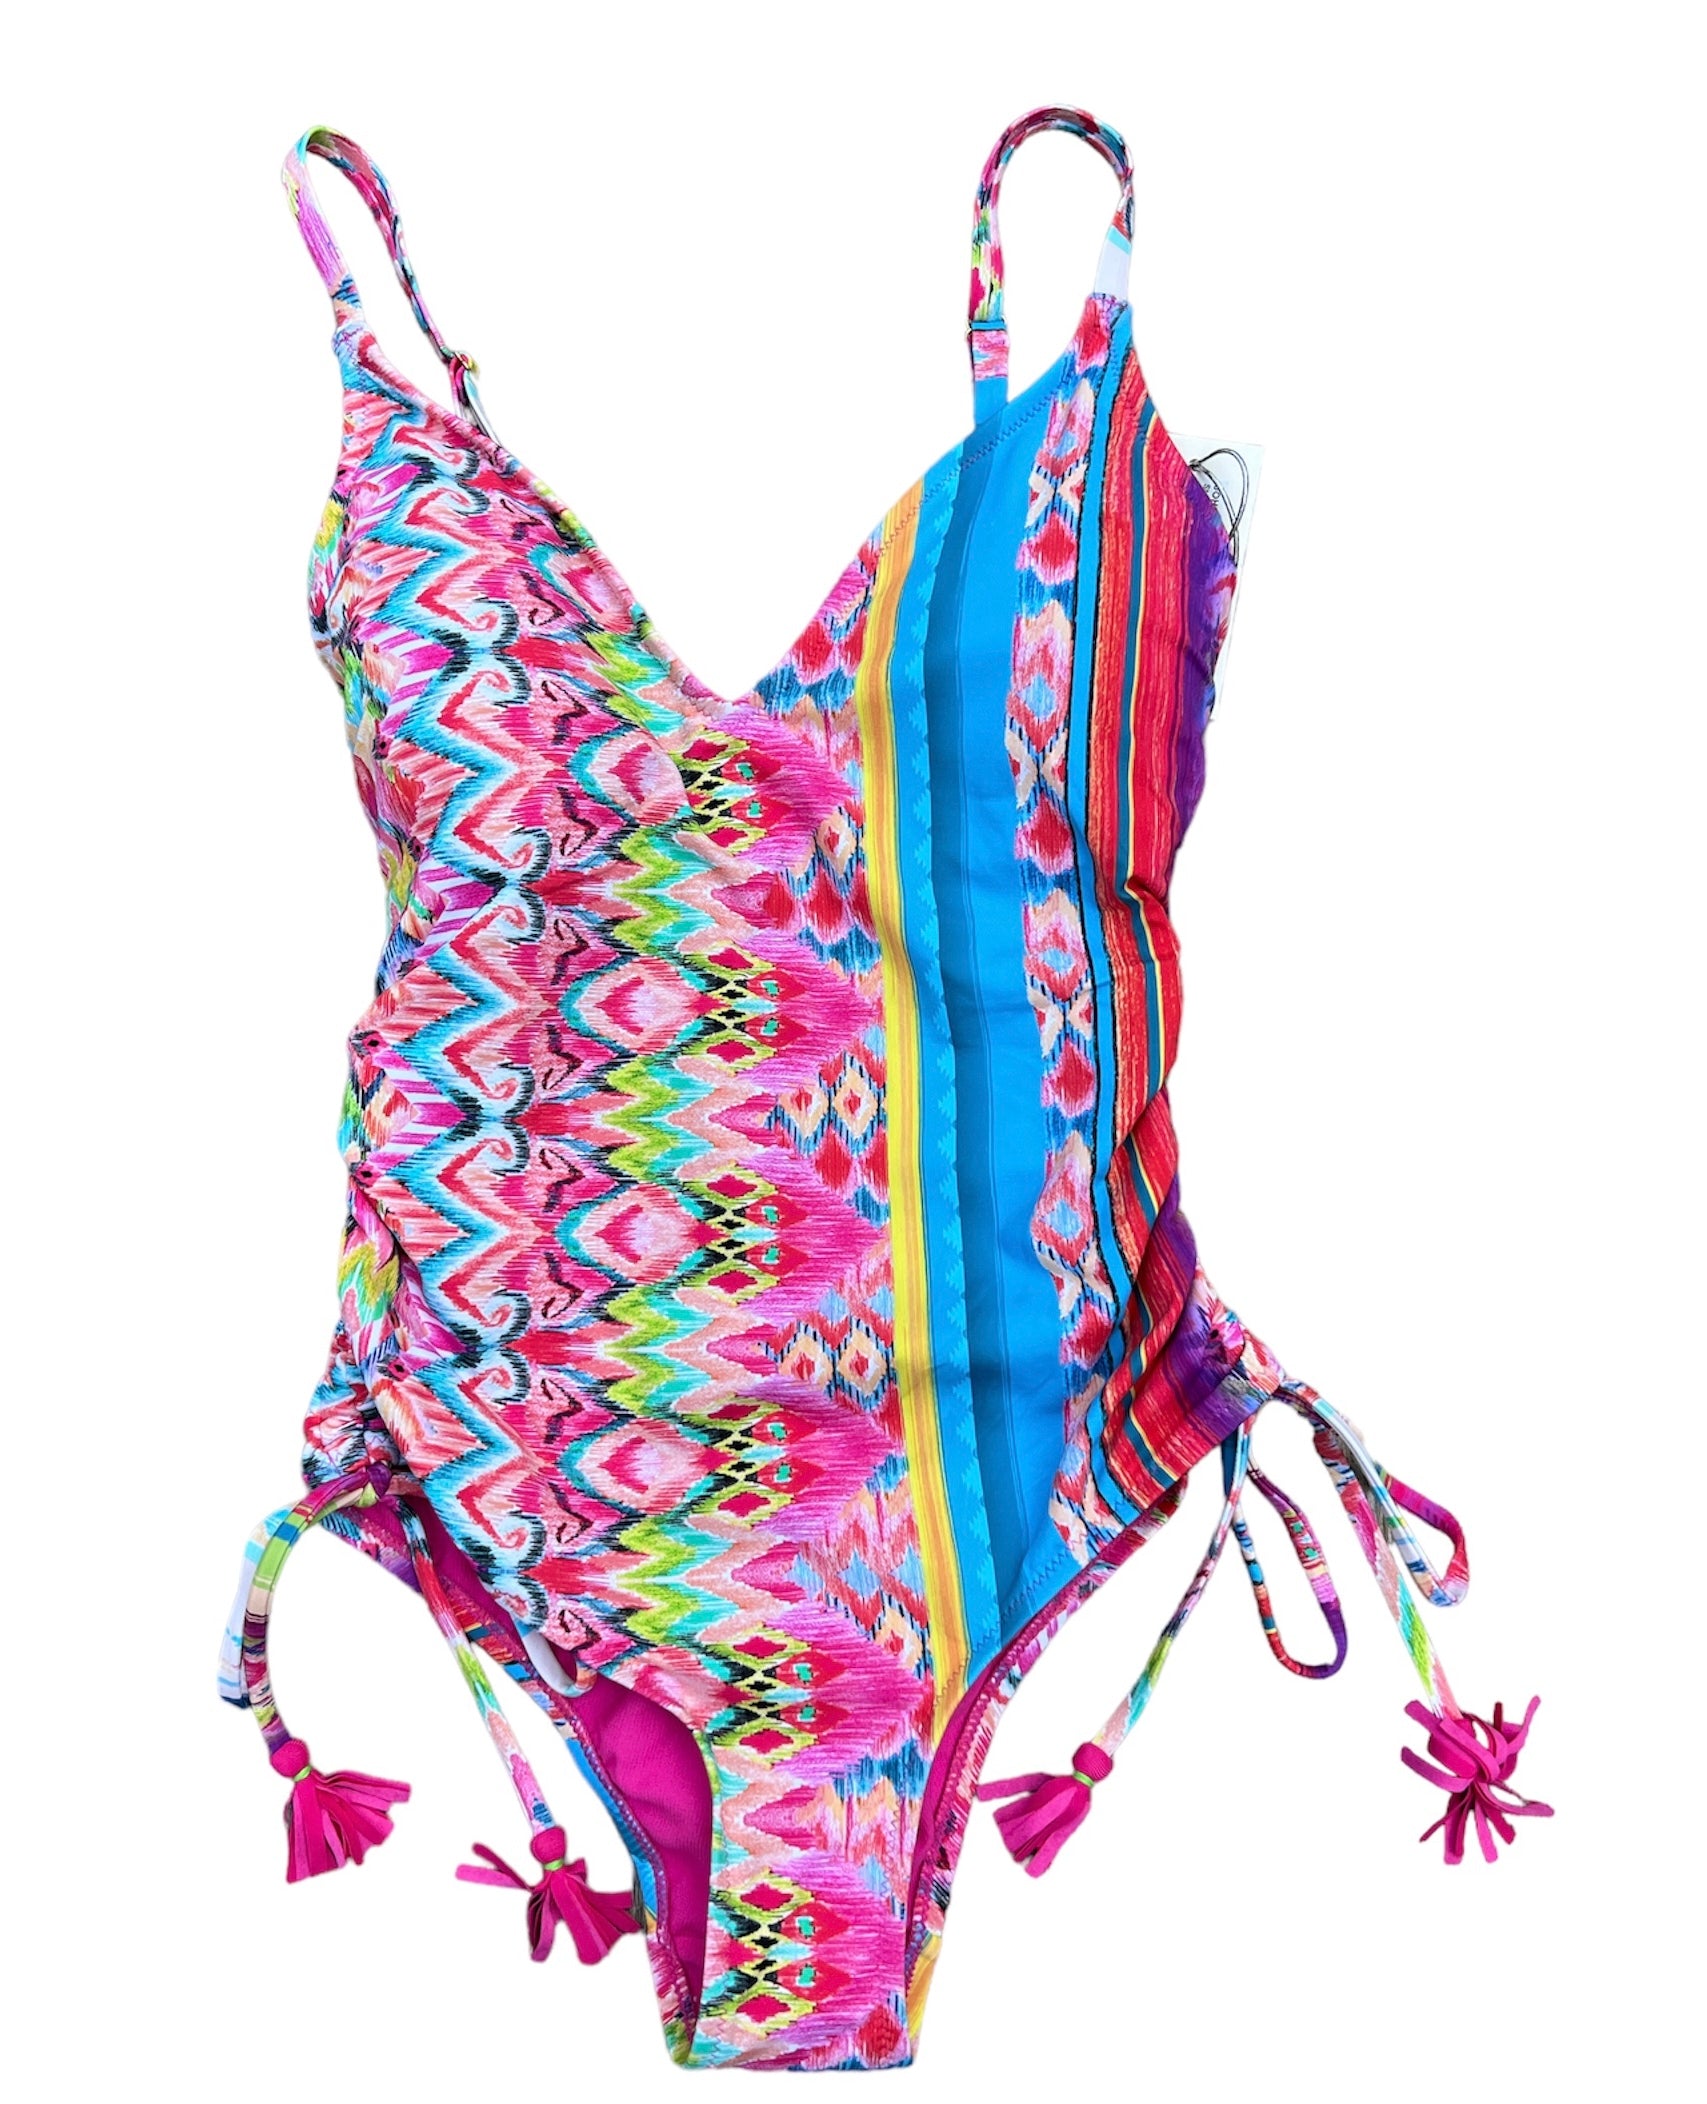 Johnny Was "Francesca" One-piece Printed Swimsuit, S